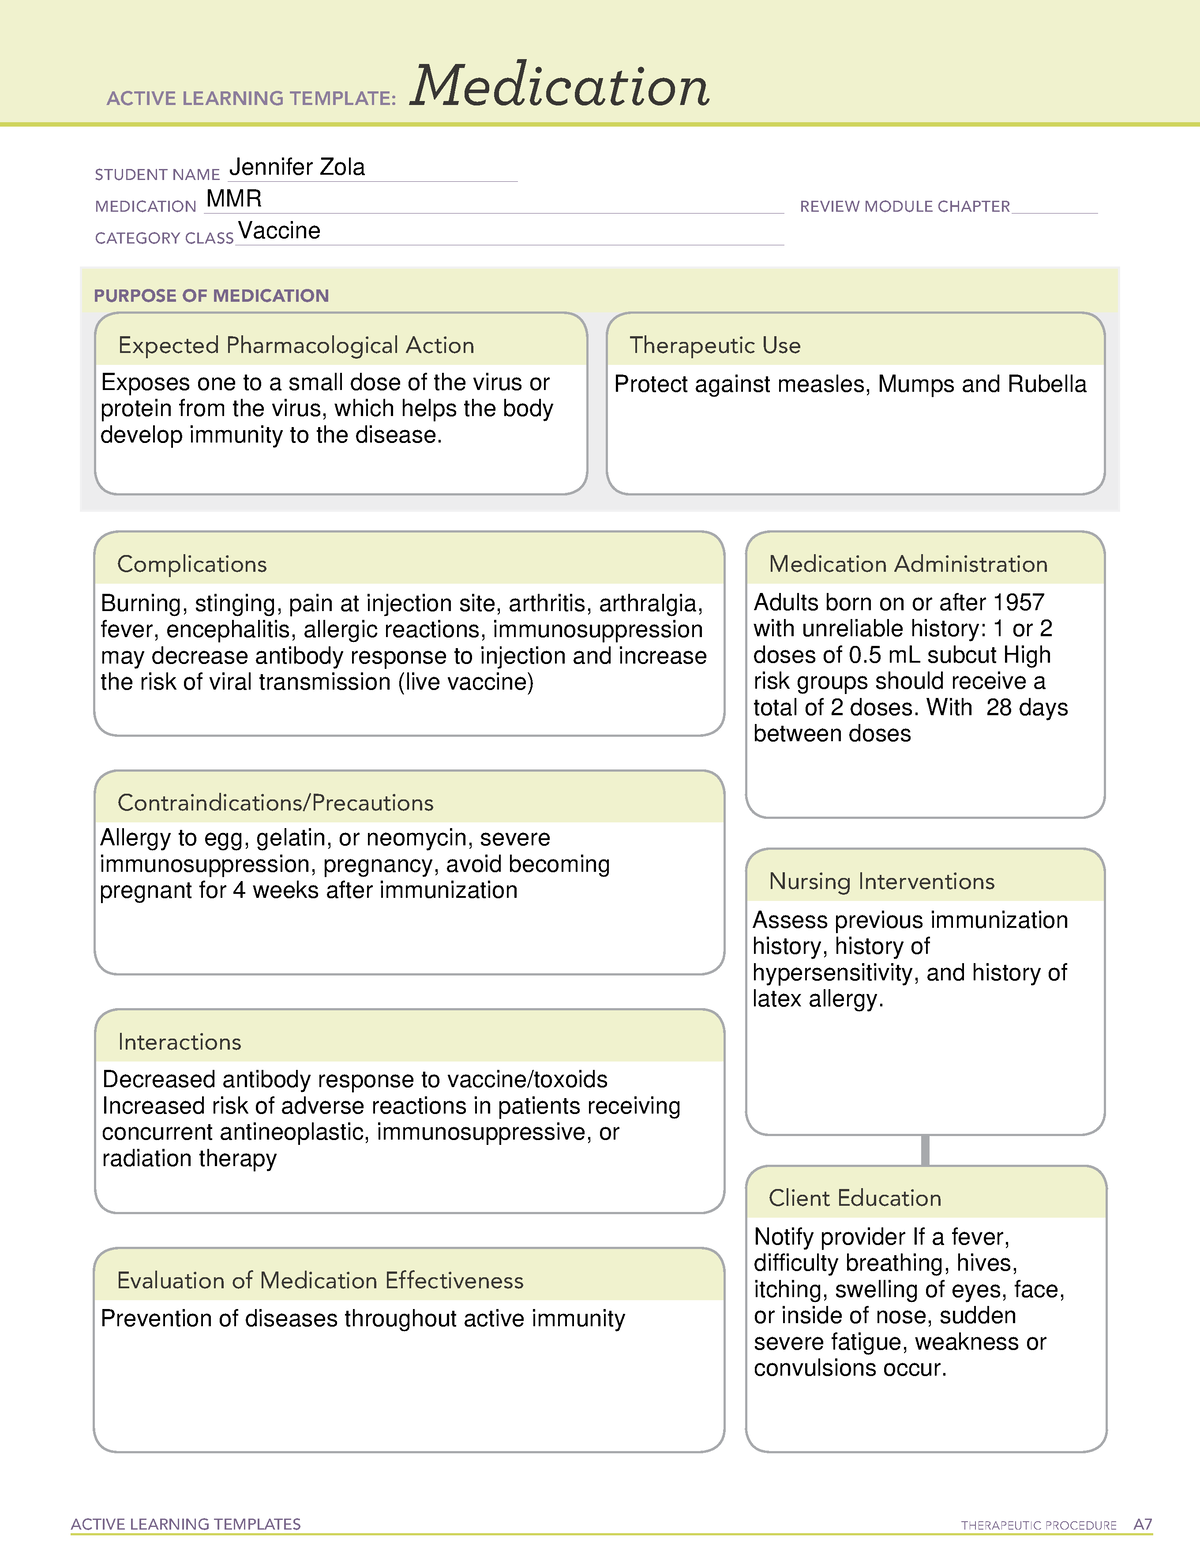 MMR med card active learning template ACTIVE LEARNING TEMPLATES